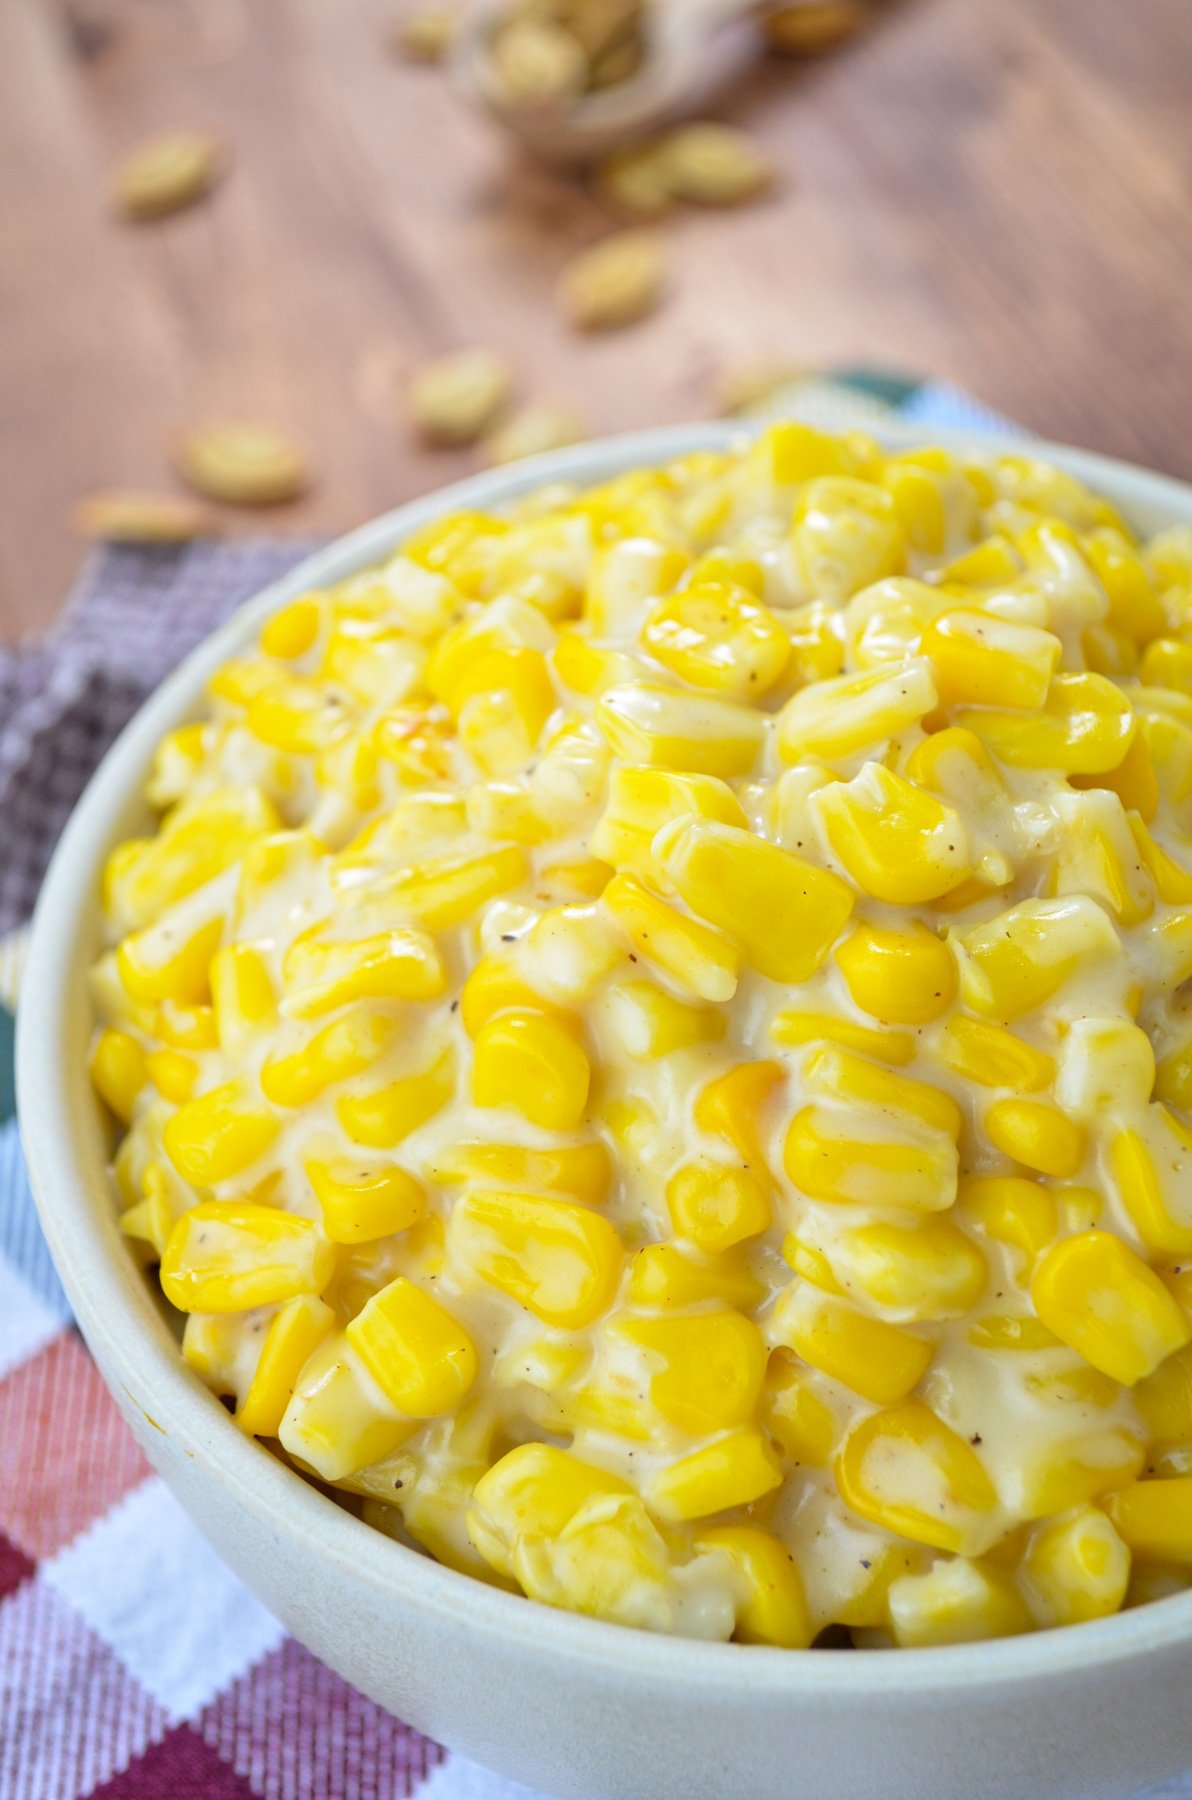 A bowl of creamed corn, resting on colorful napkins.